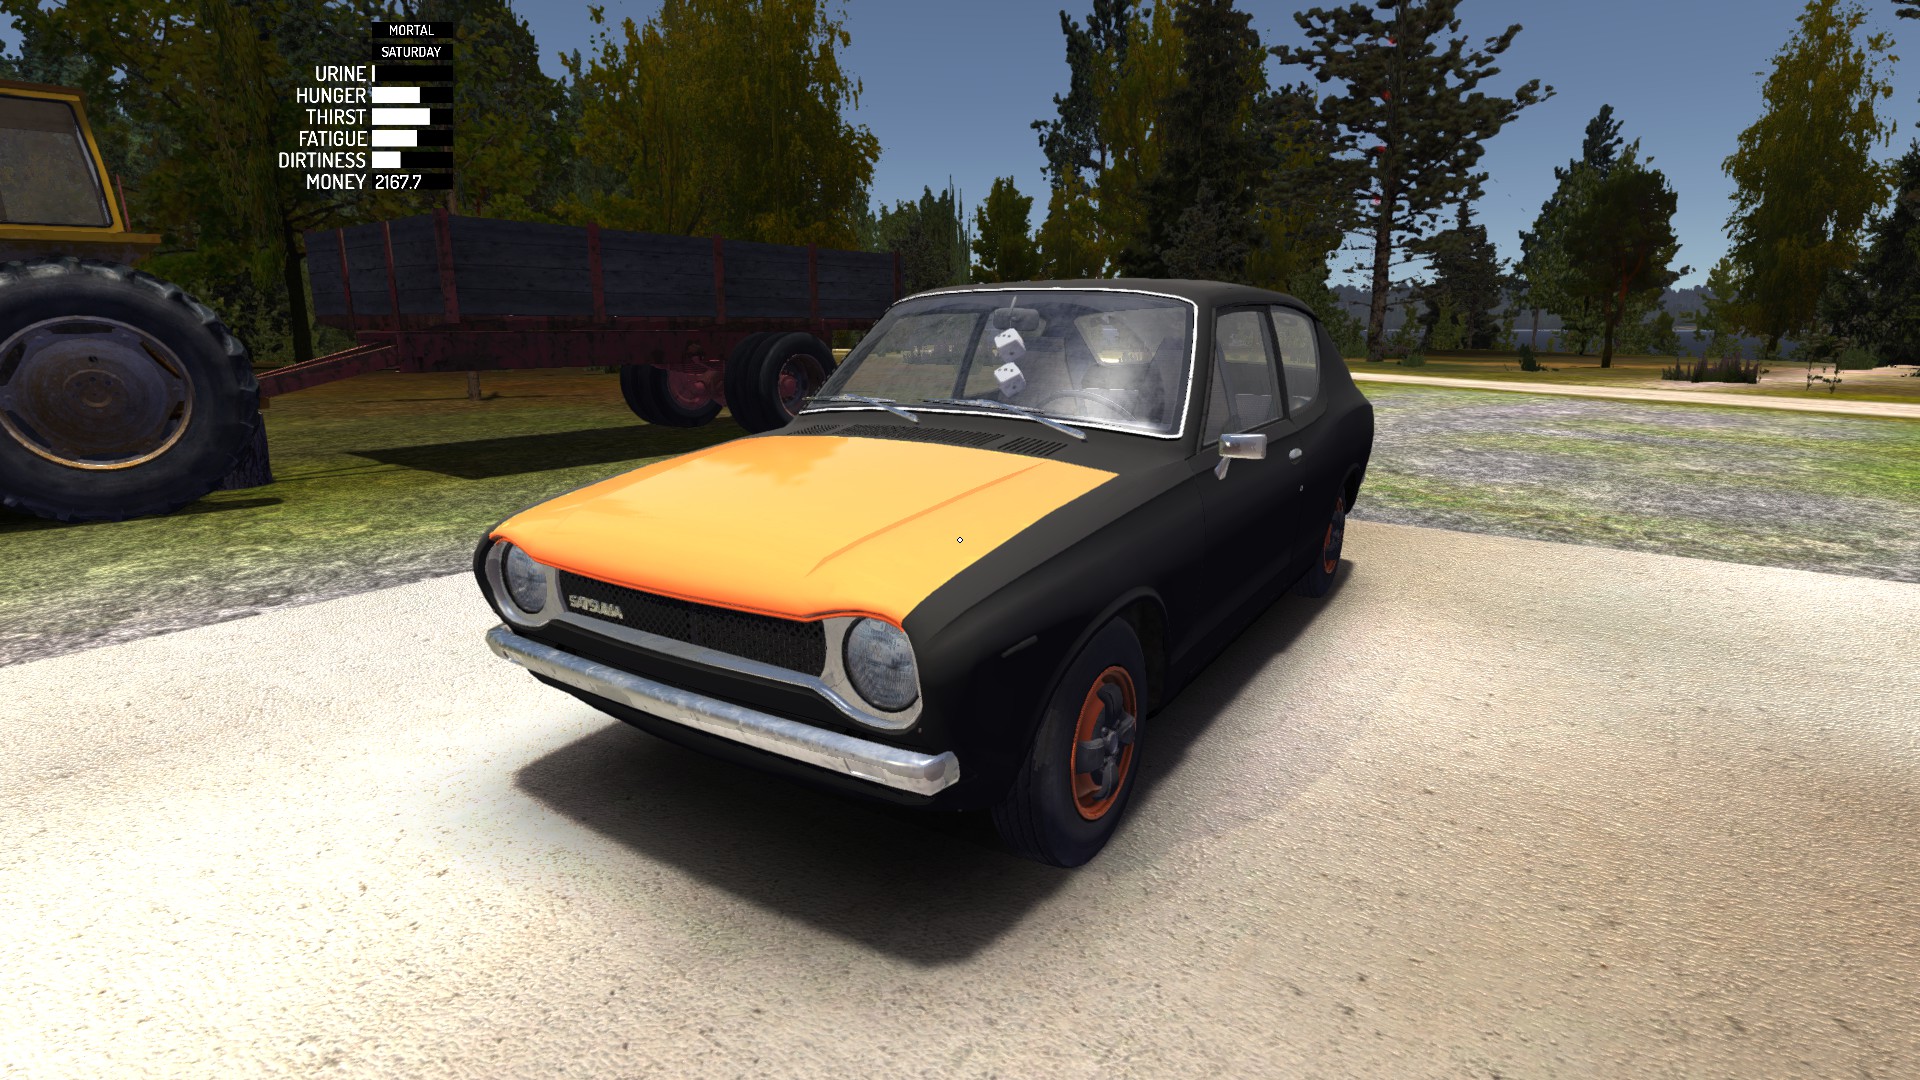 My Summer Car (FULL Car Build Guide 2020!) (29.05.2020 Update!) BOLT SIZES  INCLUDED! 